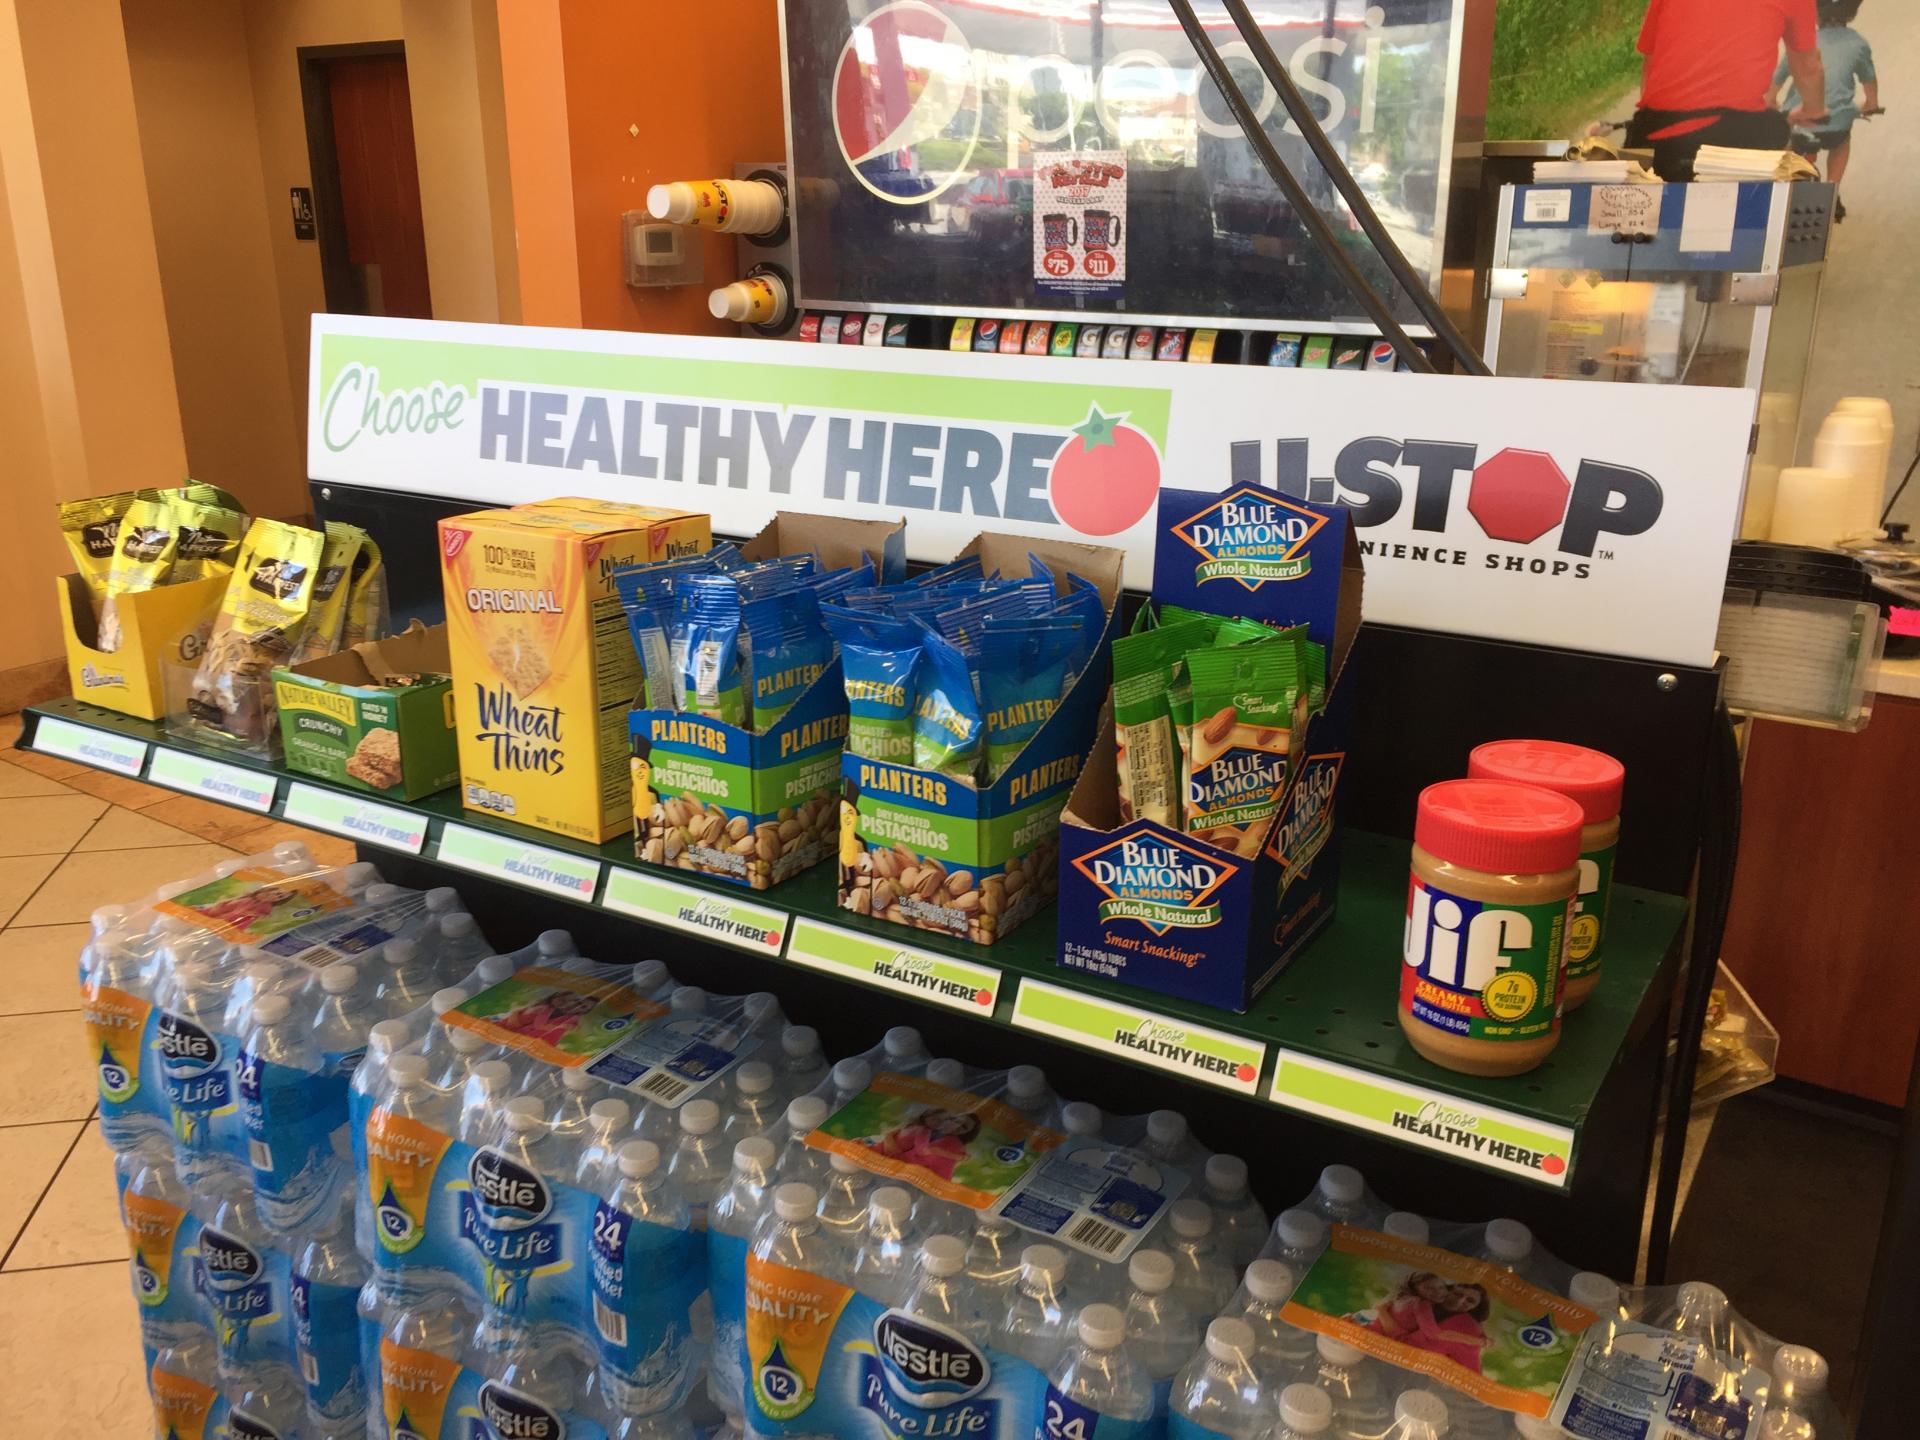 choose-healthy-here signage in gas station